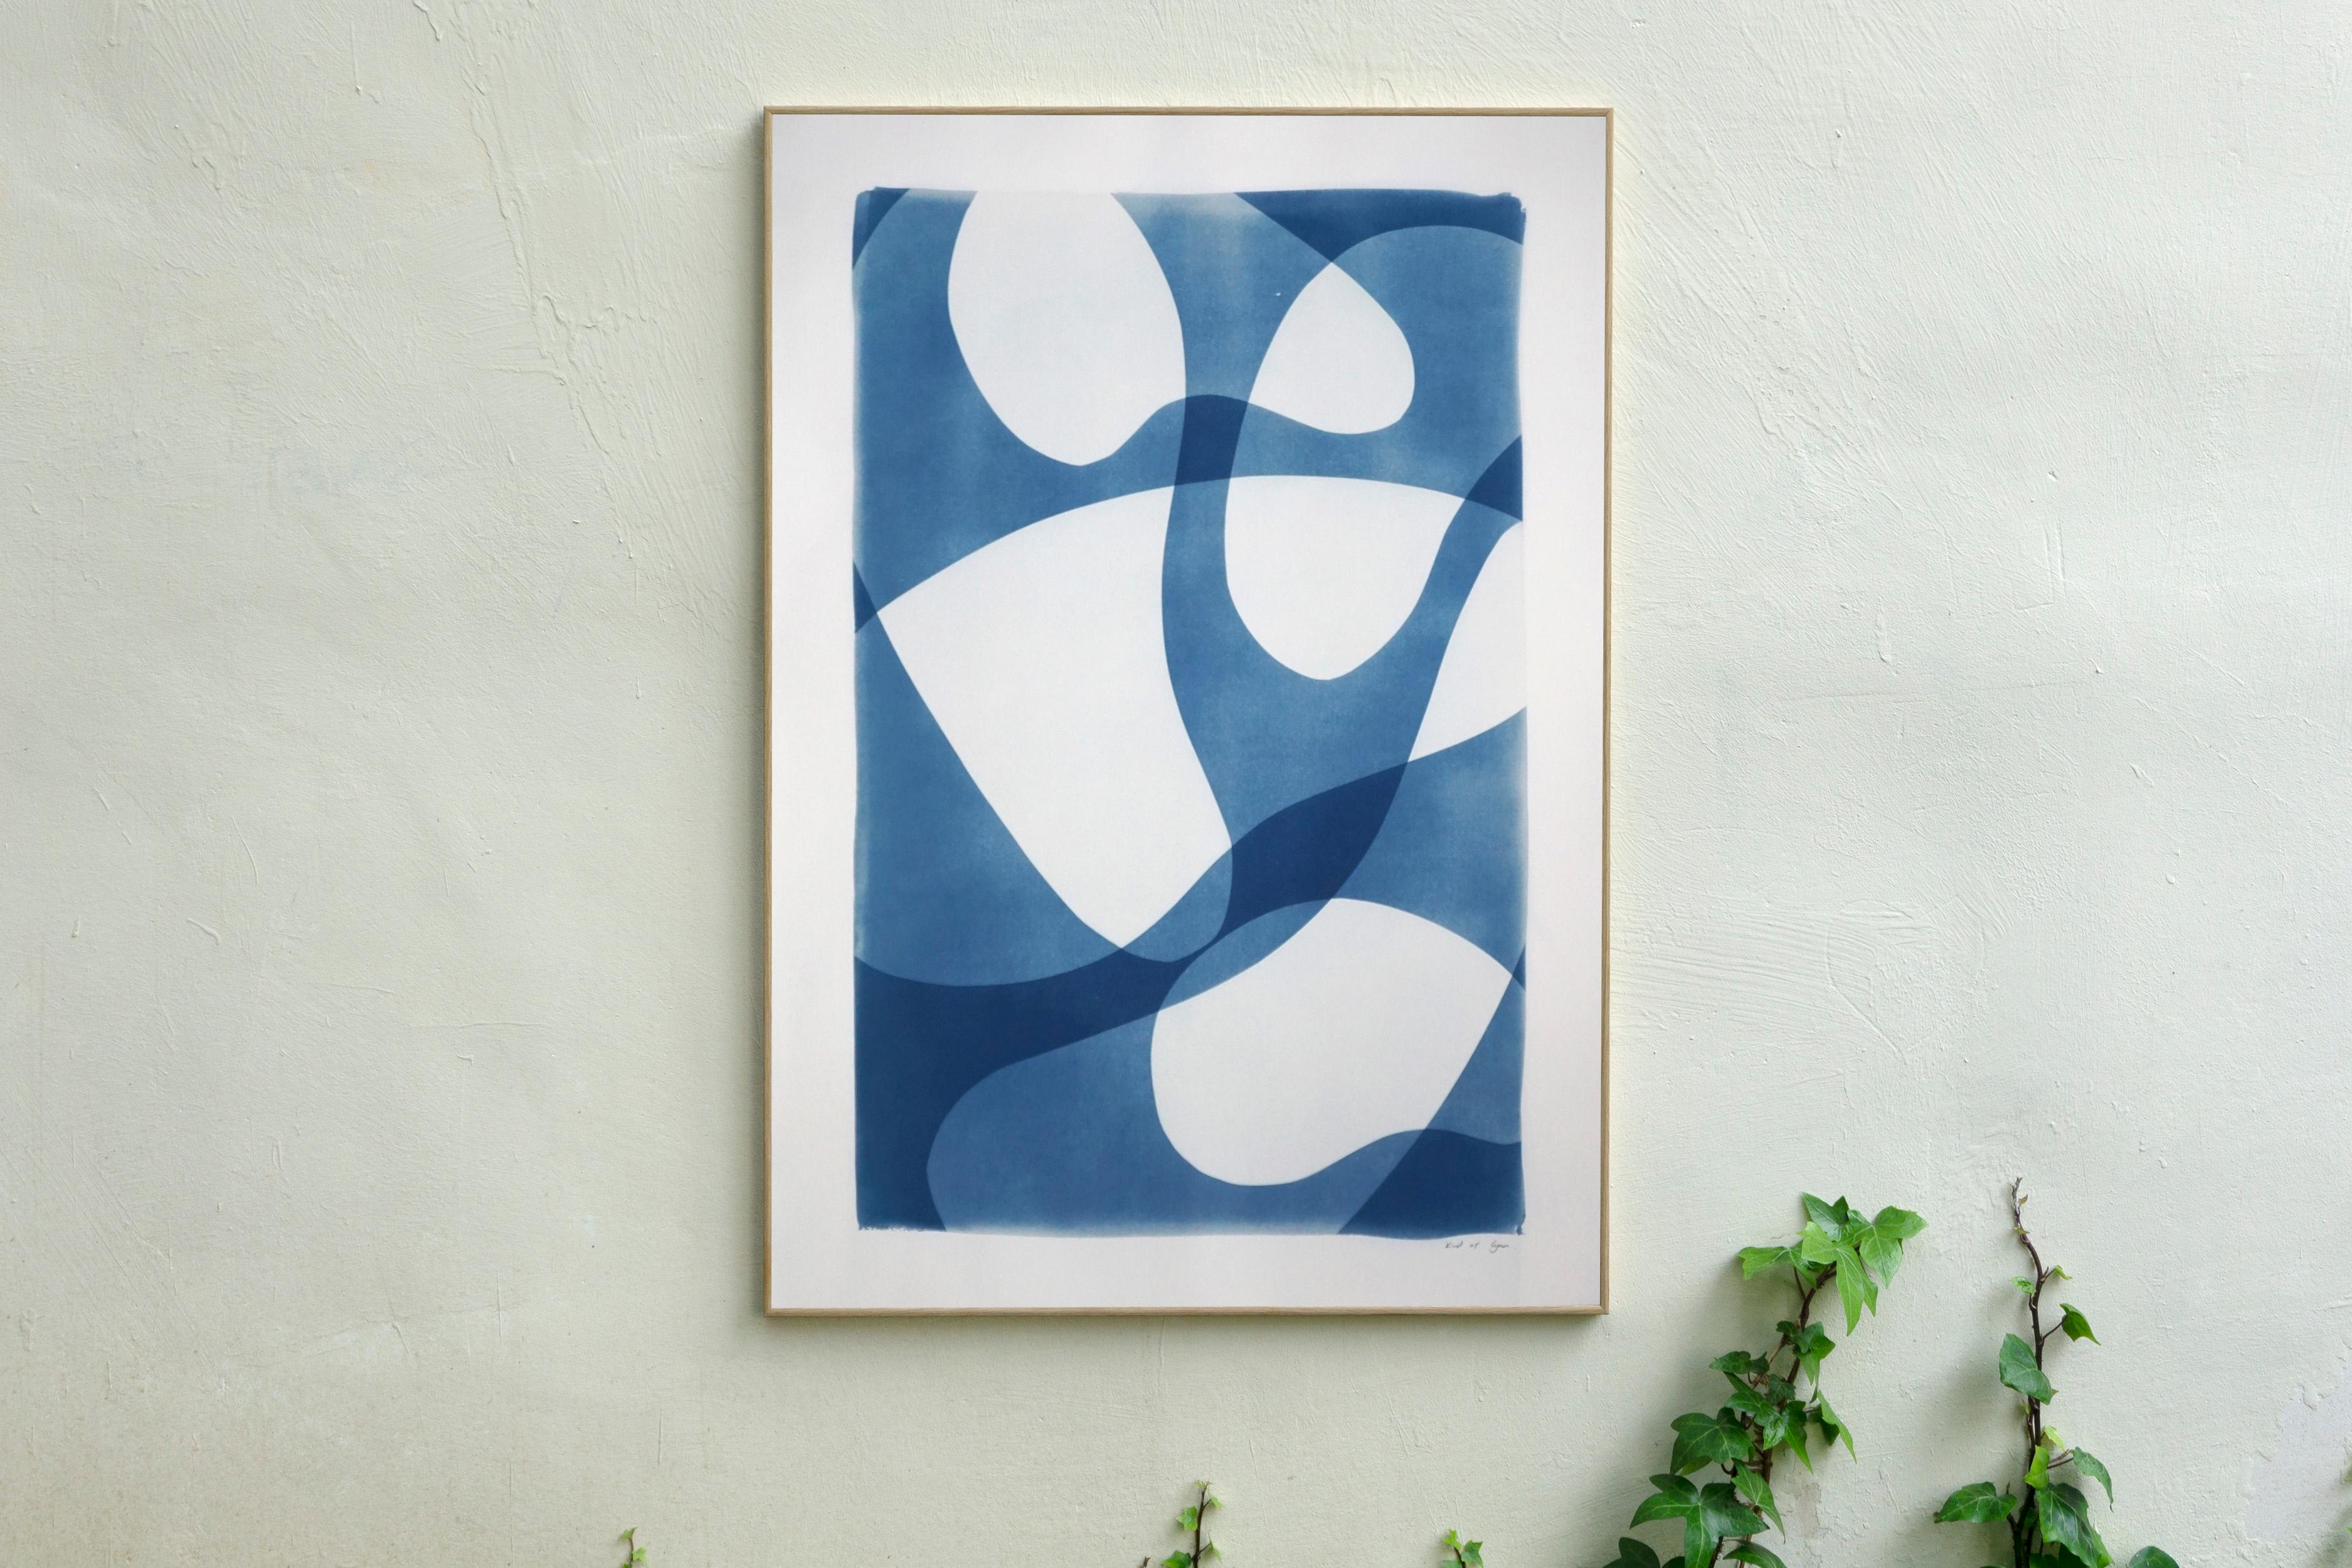 Unique Photogram of Ghostly Pool Shapes, Blue and White Minimal Cyanotype, Paper - Print by Kind of Cyan